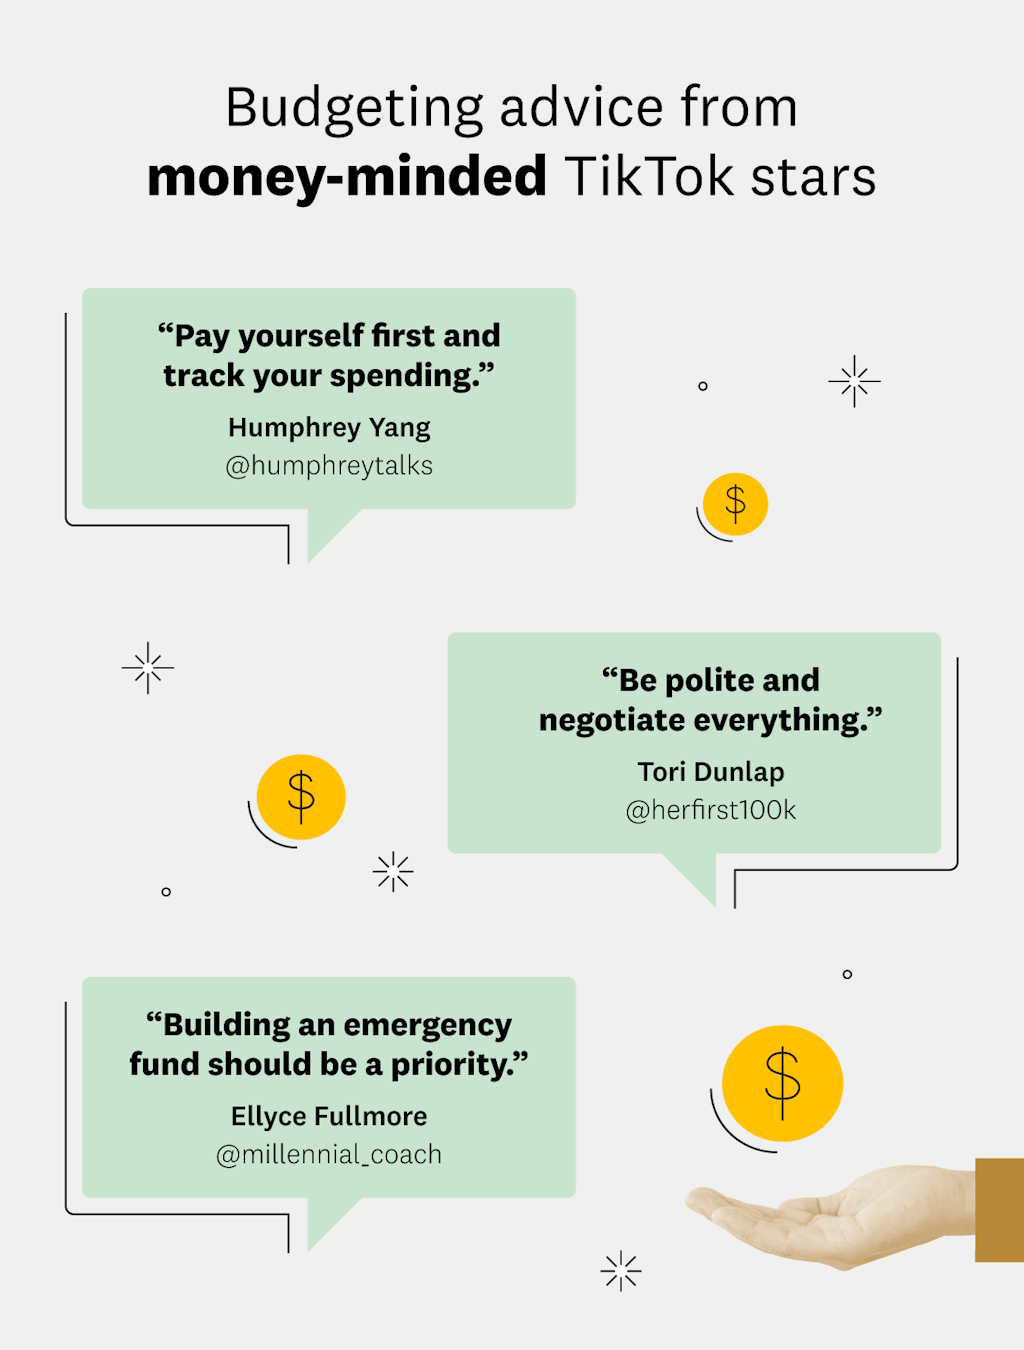 An infographic featuring budgeting advice from money-minded TikTok stars. The following quotes appear one above the other in light green talk bubbles. 

"Pay yourself first and track your spending" - Humphrey Yang

"Be polite and negotiate everything" - Tori Dunlap

"Building an emergency fund should be a priority" - Ellyce Fullmore 